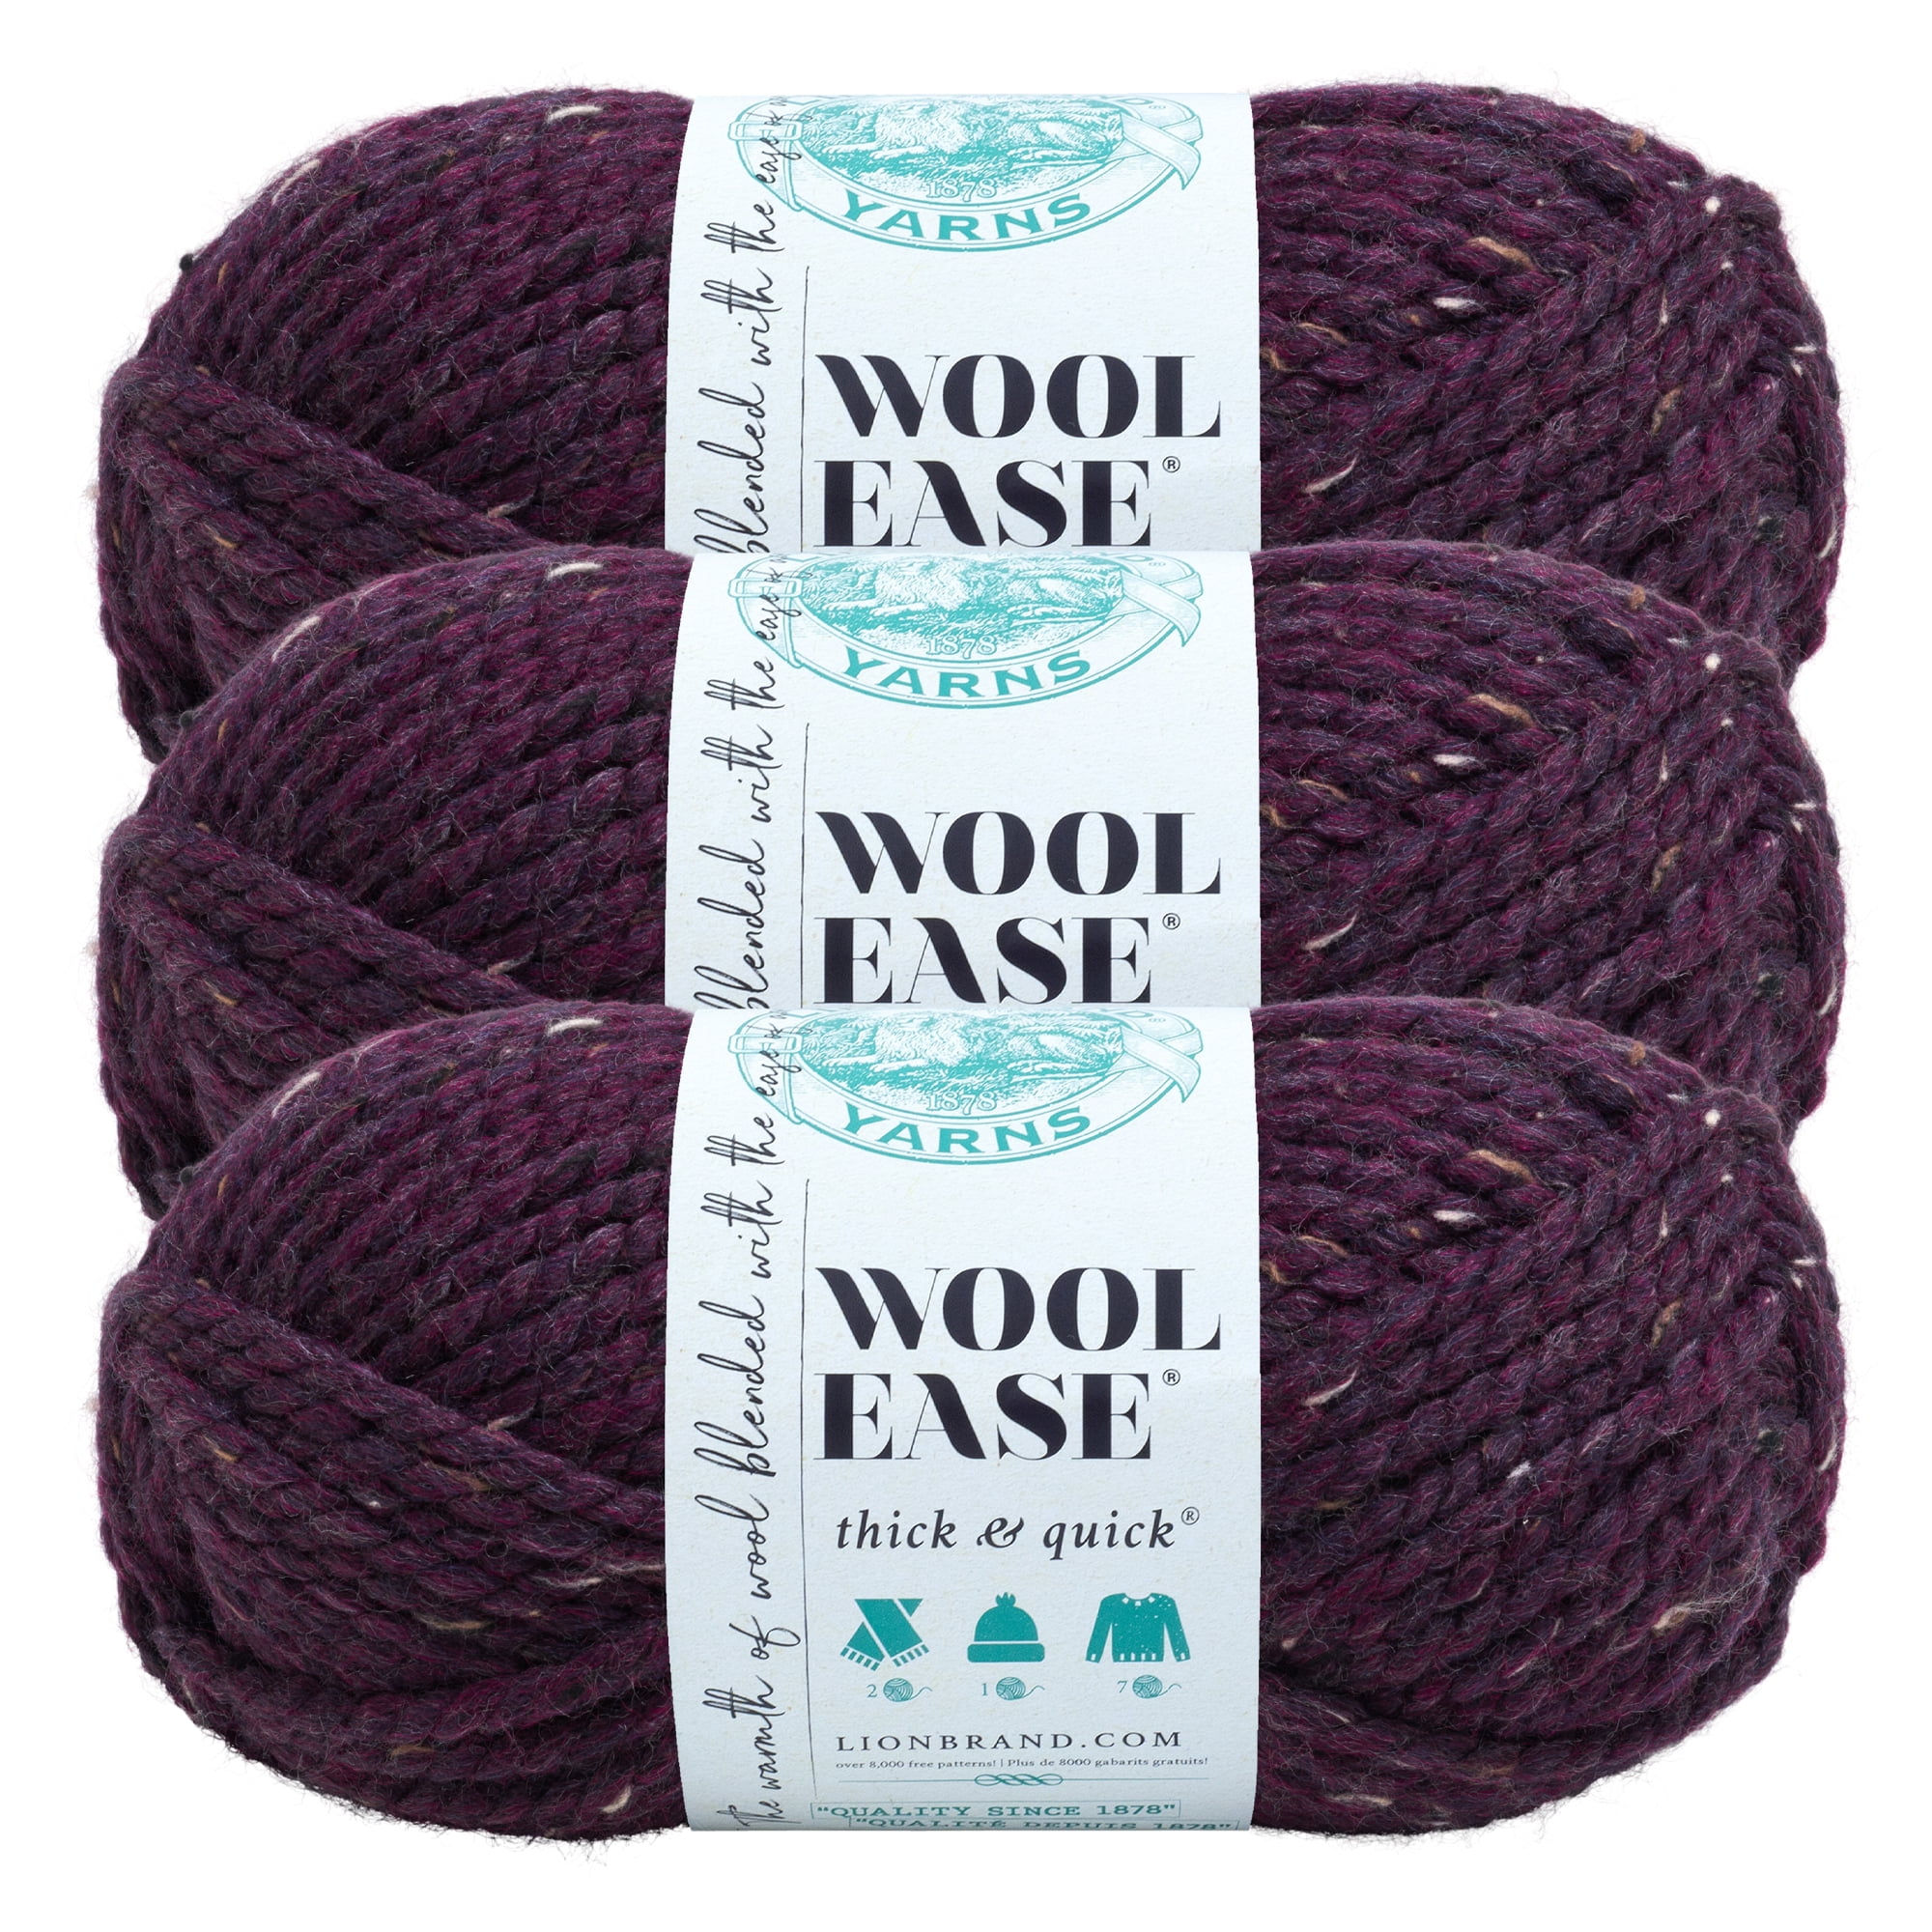 Lion Brand Yarn Wool-Ease Thick and Quick Petrol Blue Classic